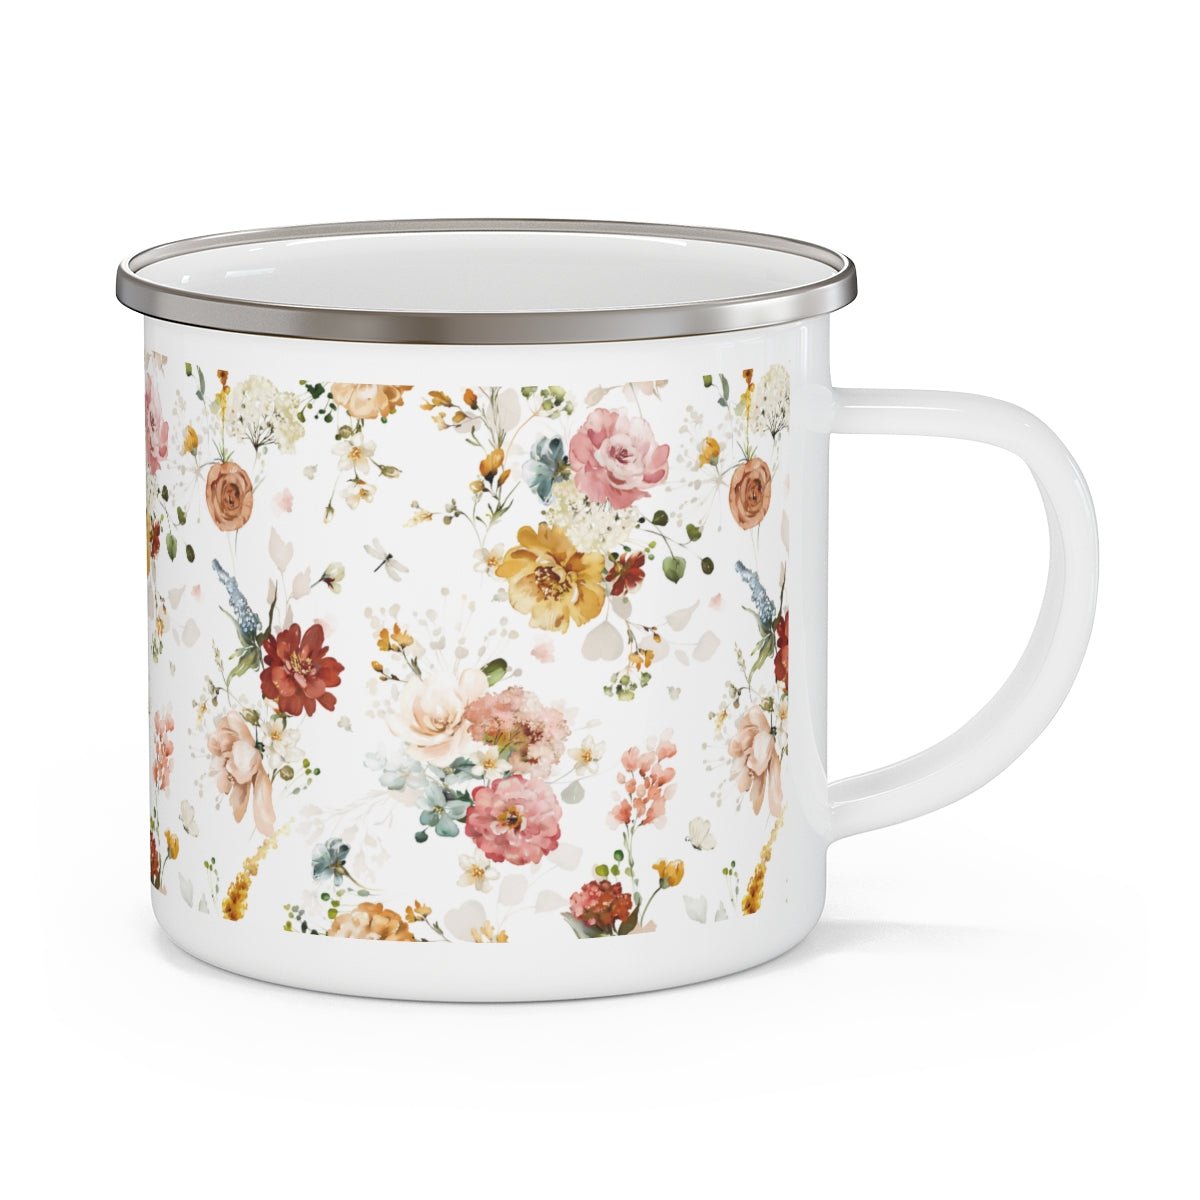 Garden Flowers Stainless Steel Camping Mug - Puffin Lime